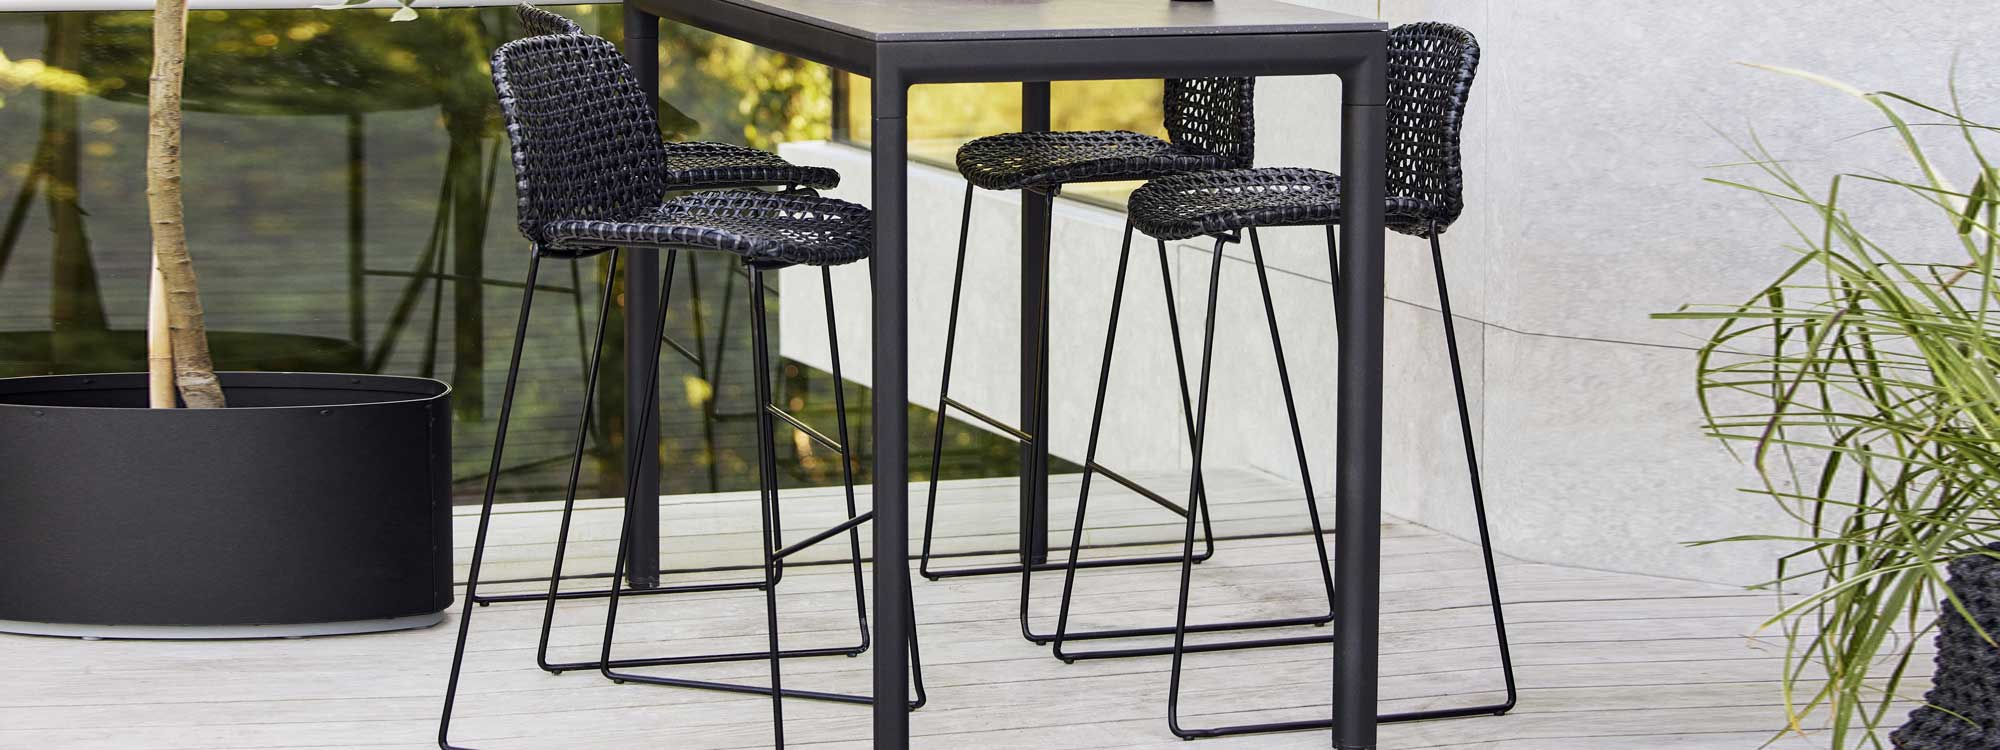 Image of lava-colored Drop bar table and Vibe bar stools on decked terrace by Cane-line outdoor furniture